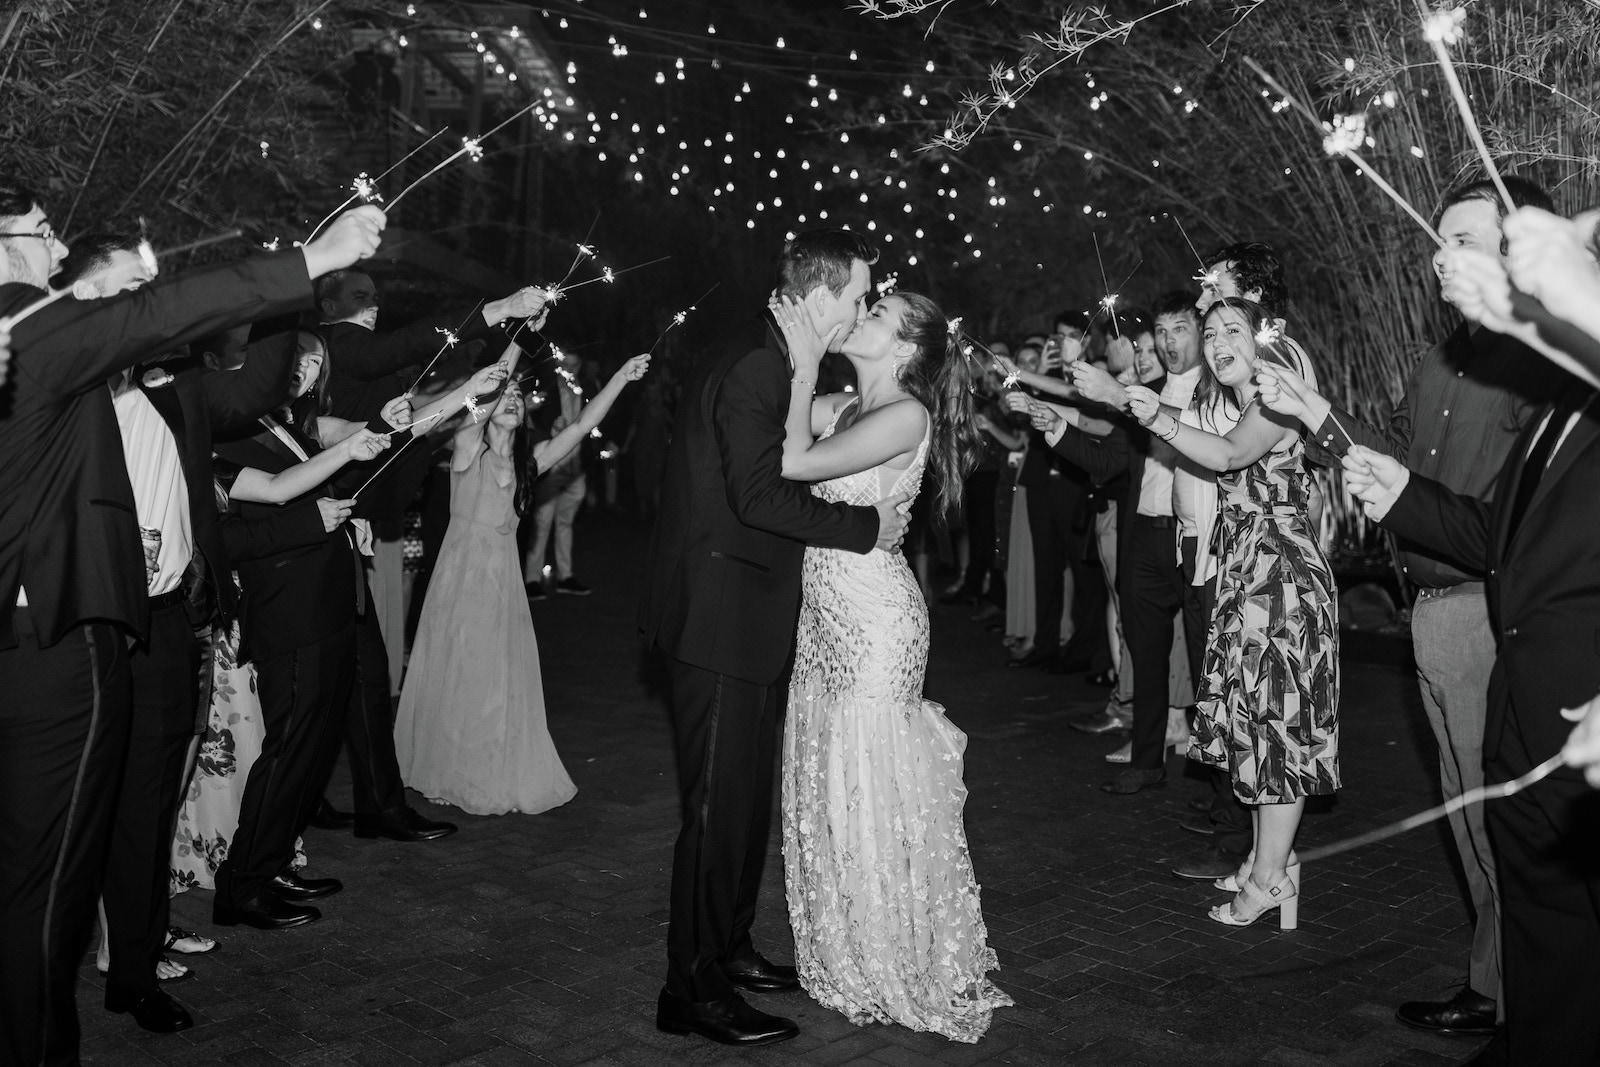 Bride and Groom Sparkler Exit in Black and White Wedding Portrait | Florida Wedding Photographer Amber McWhorter Photography